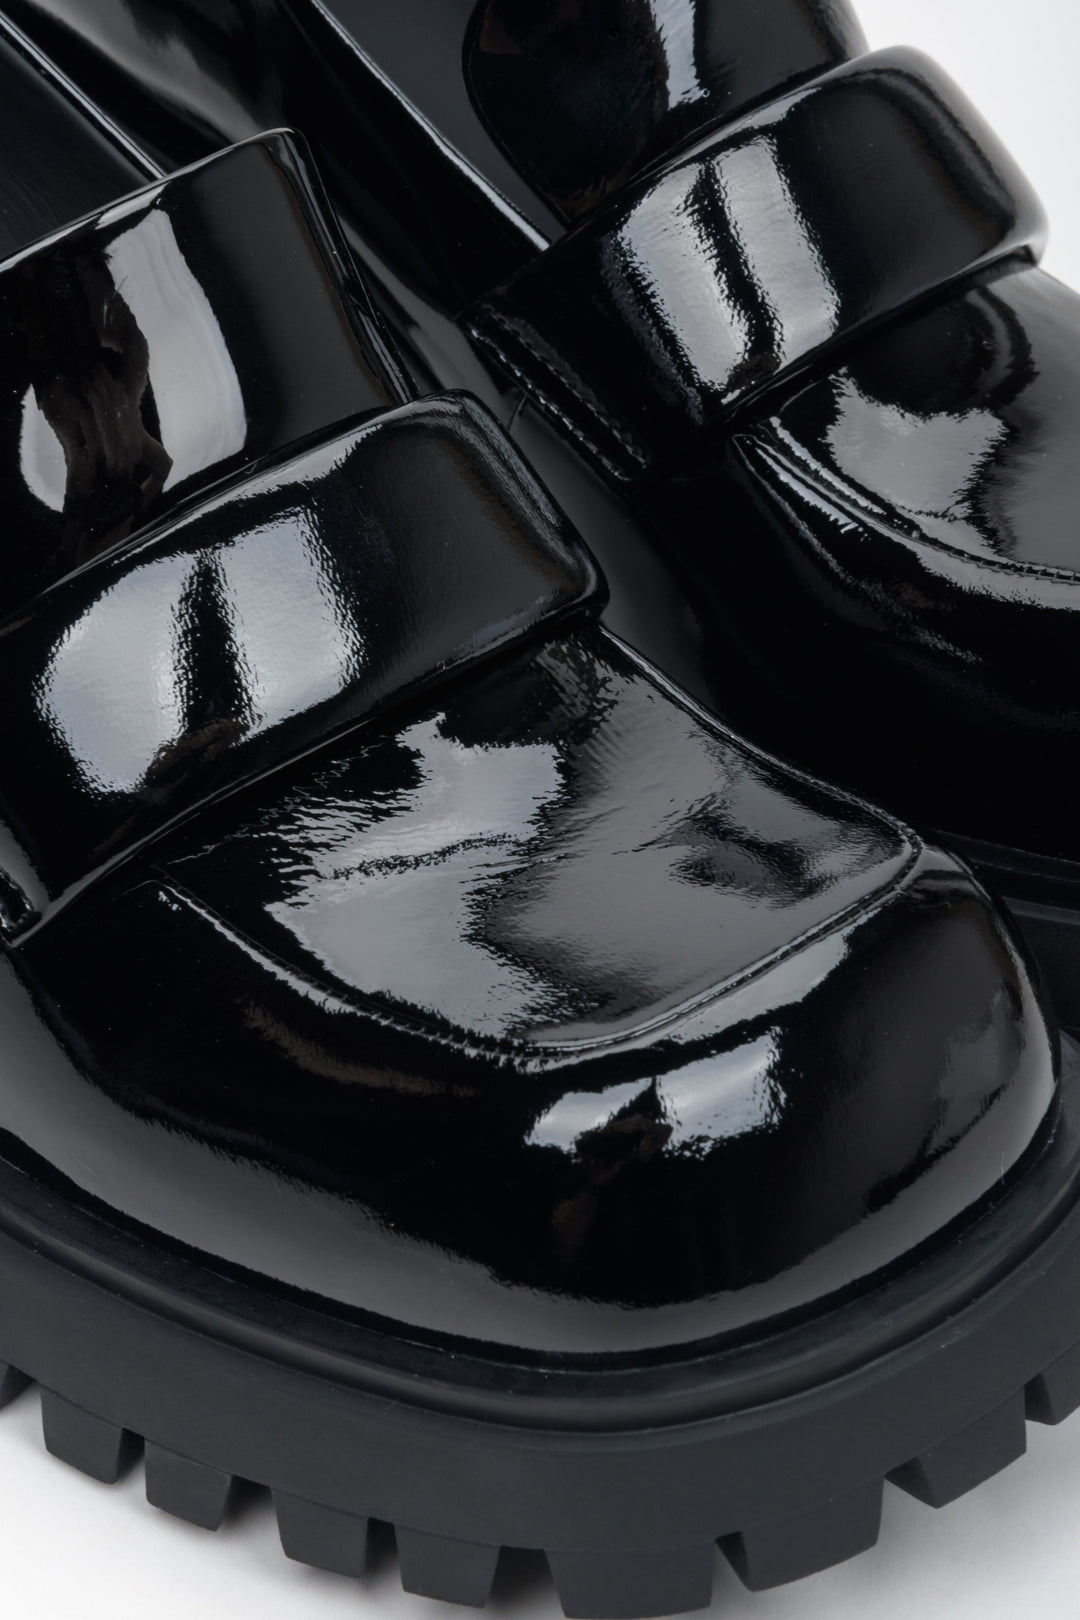 Women's black heeled loafers made of genuine patent leather - close-up on details.